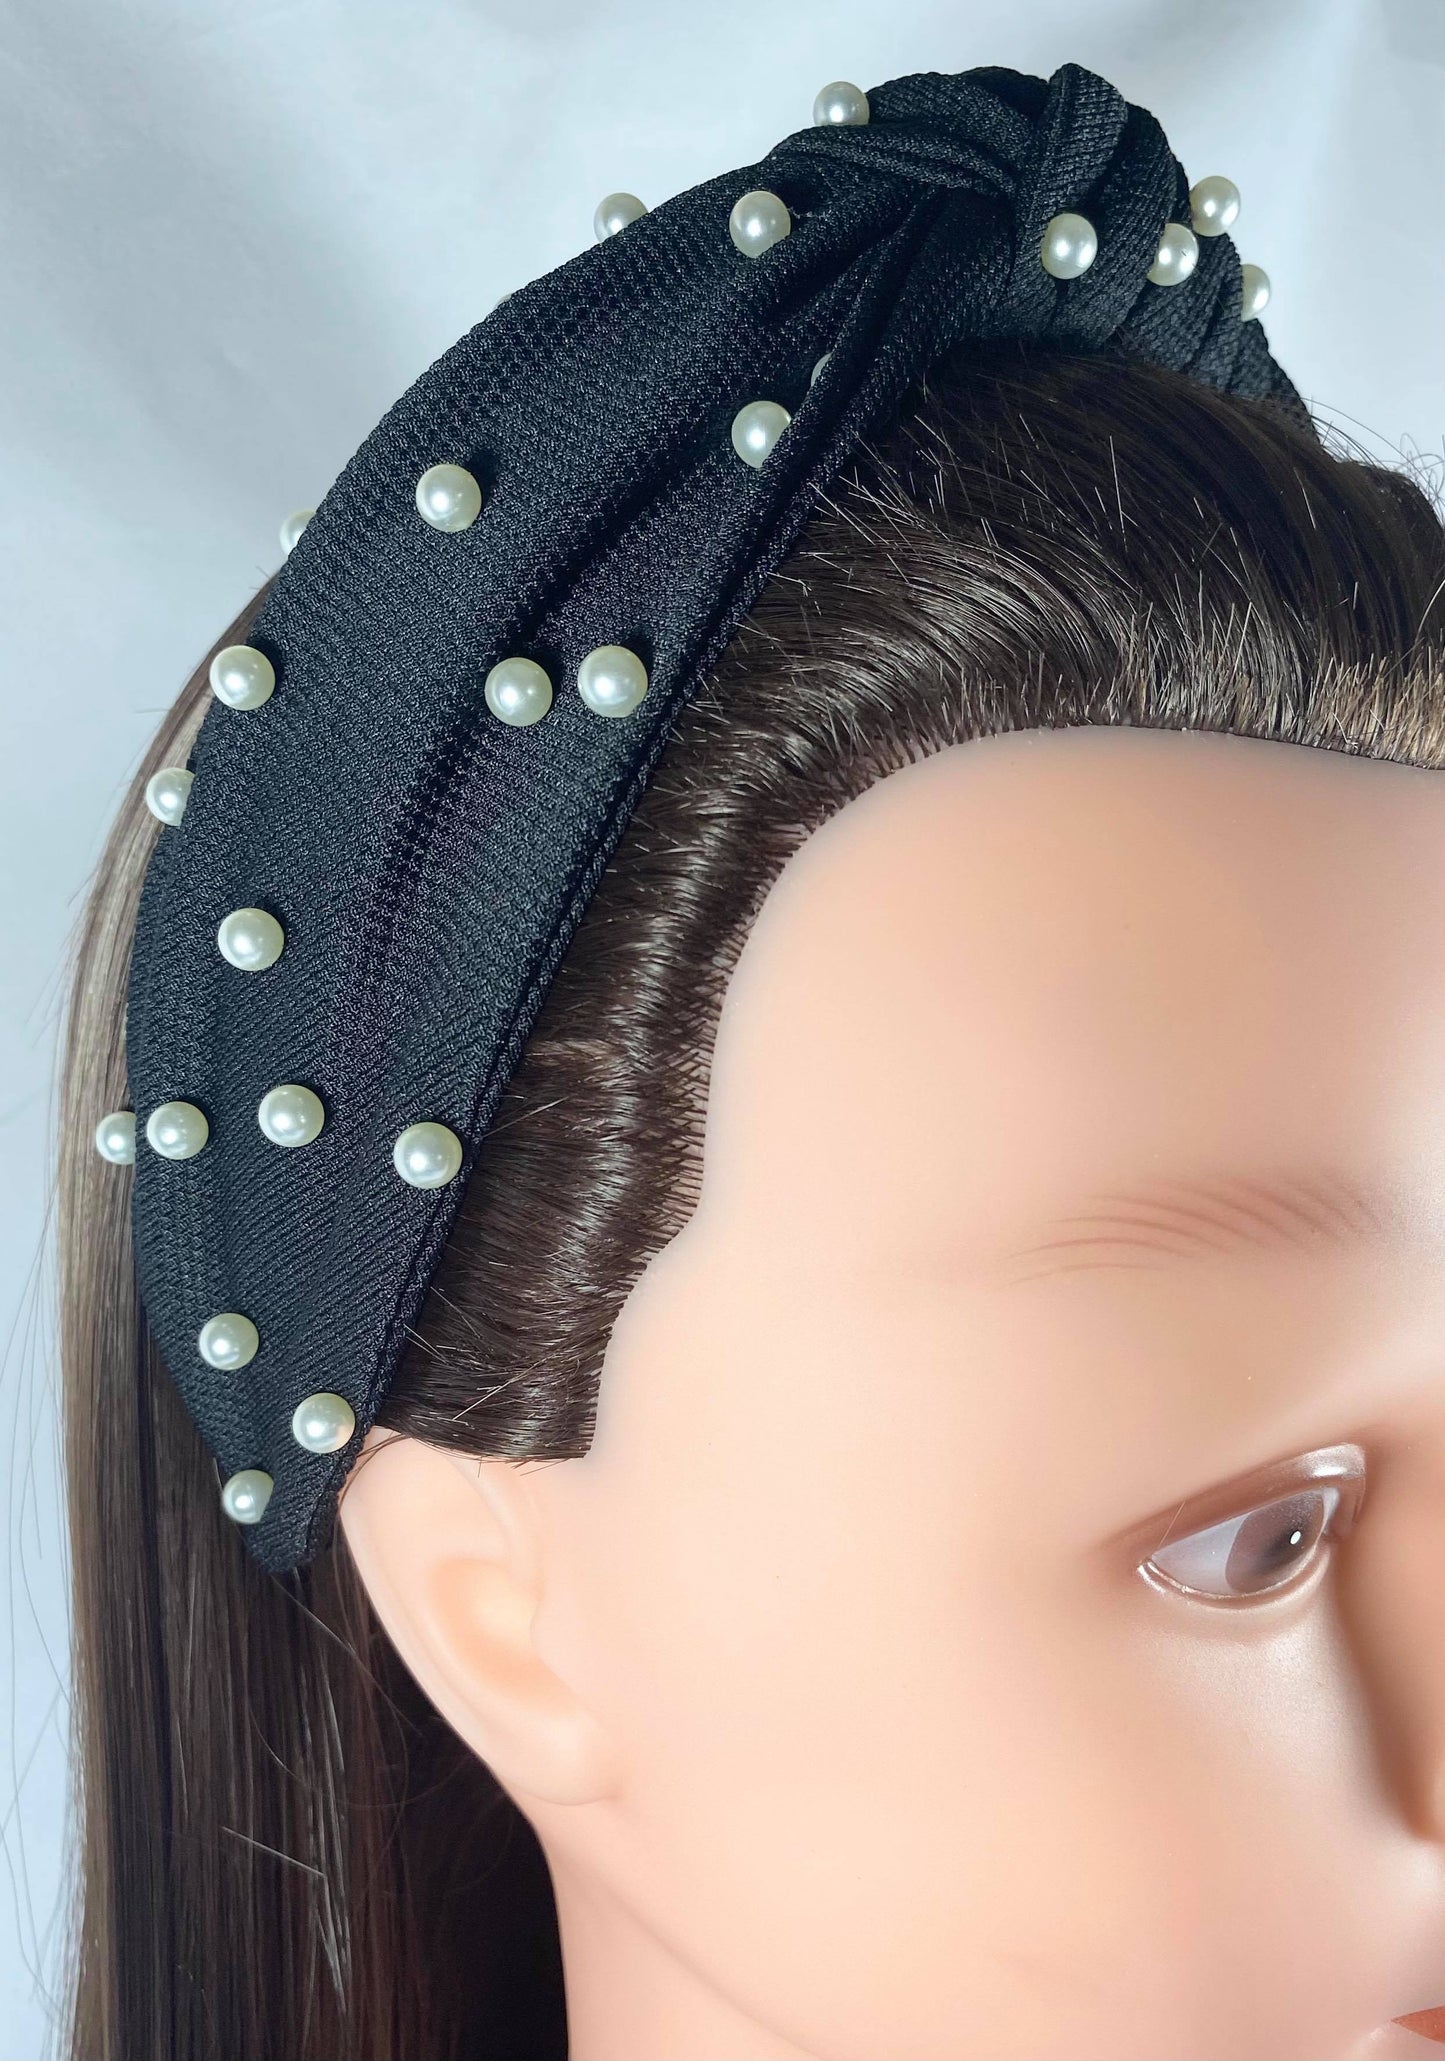 Black Pearl Knotted Headband with Pearls